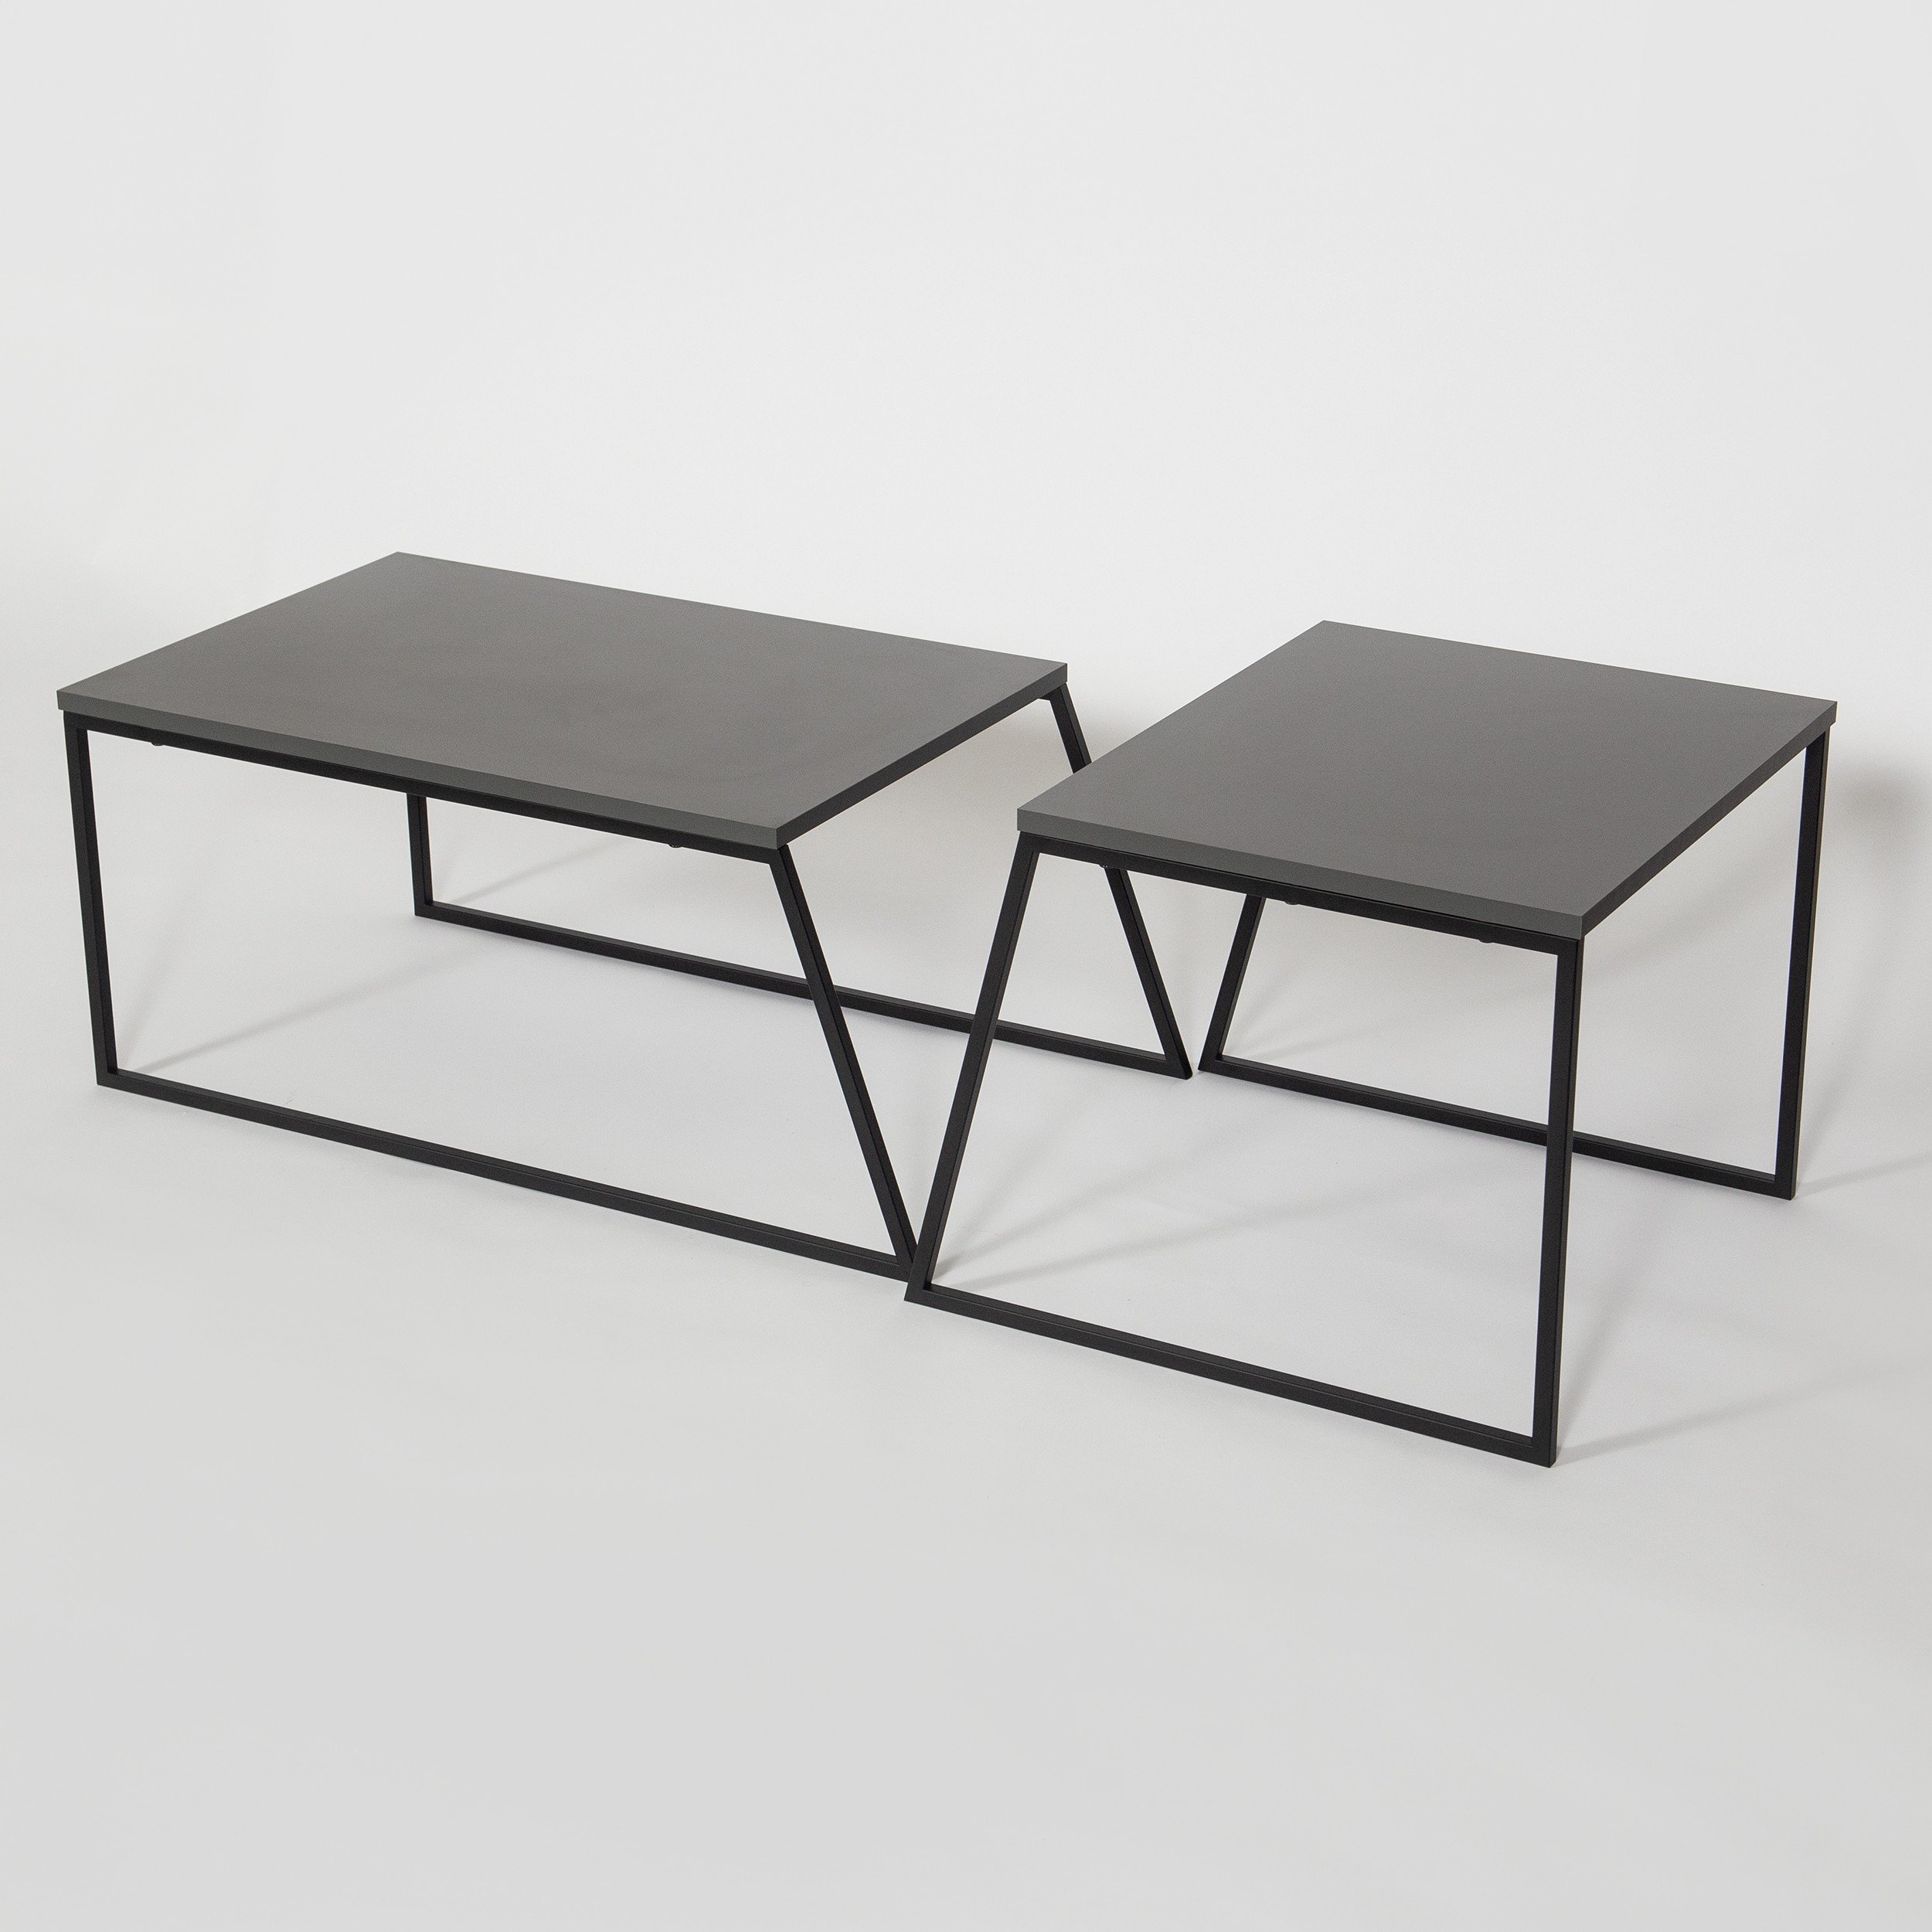 PAL COFFEE TABLE - ANTHRACITE - M.SH.16582.3